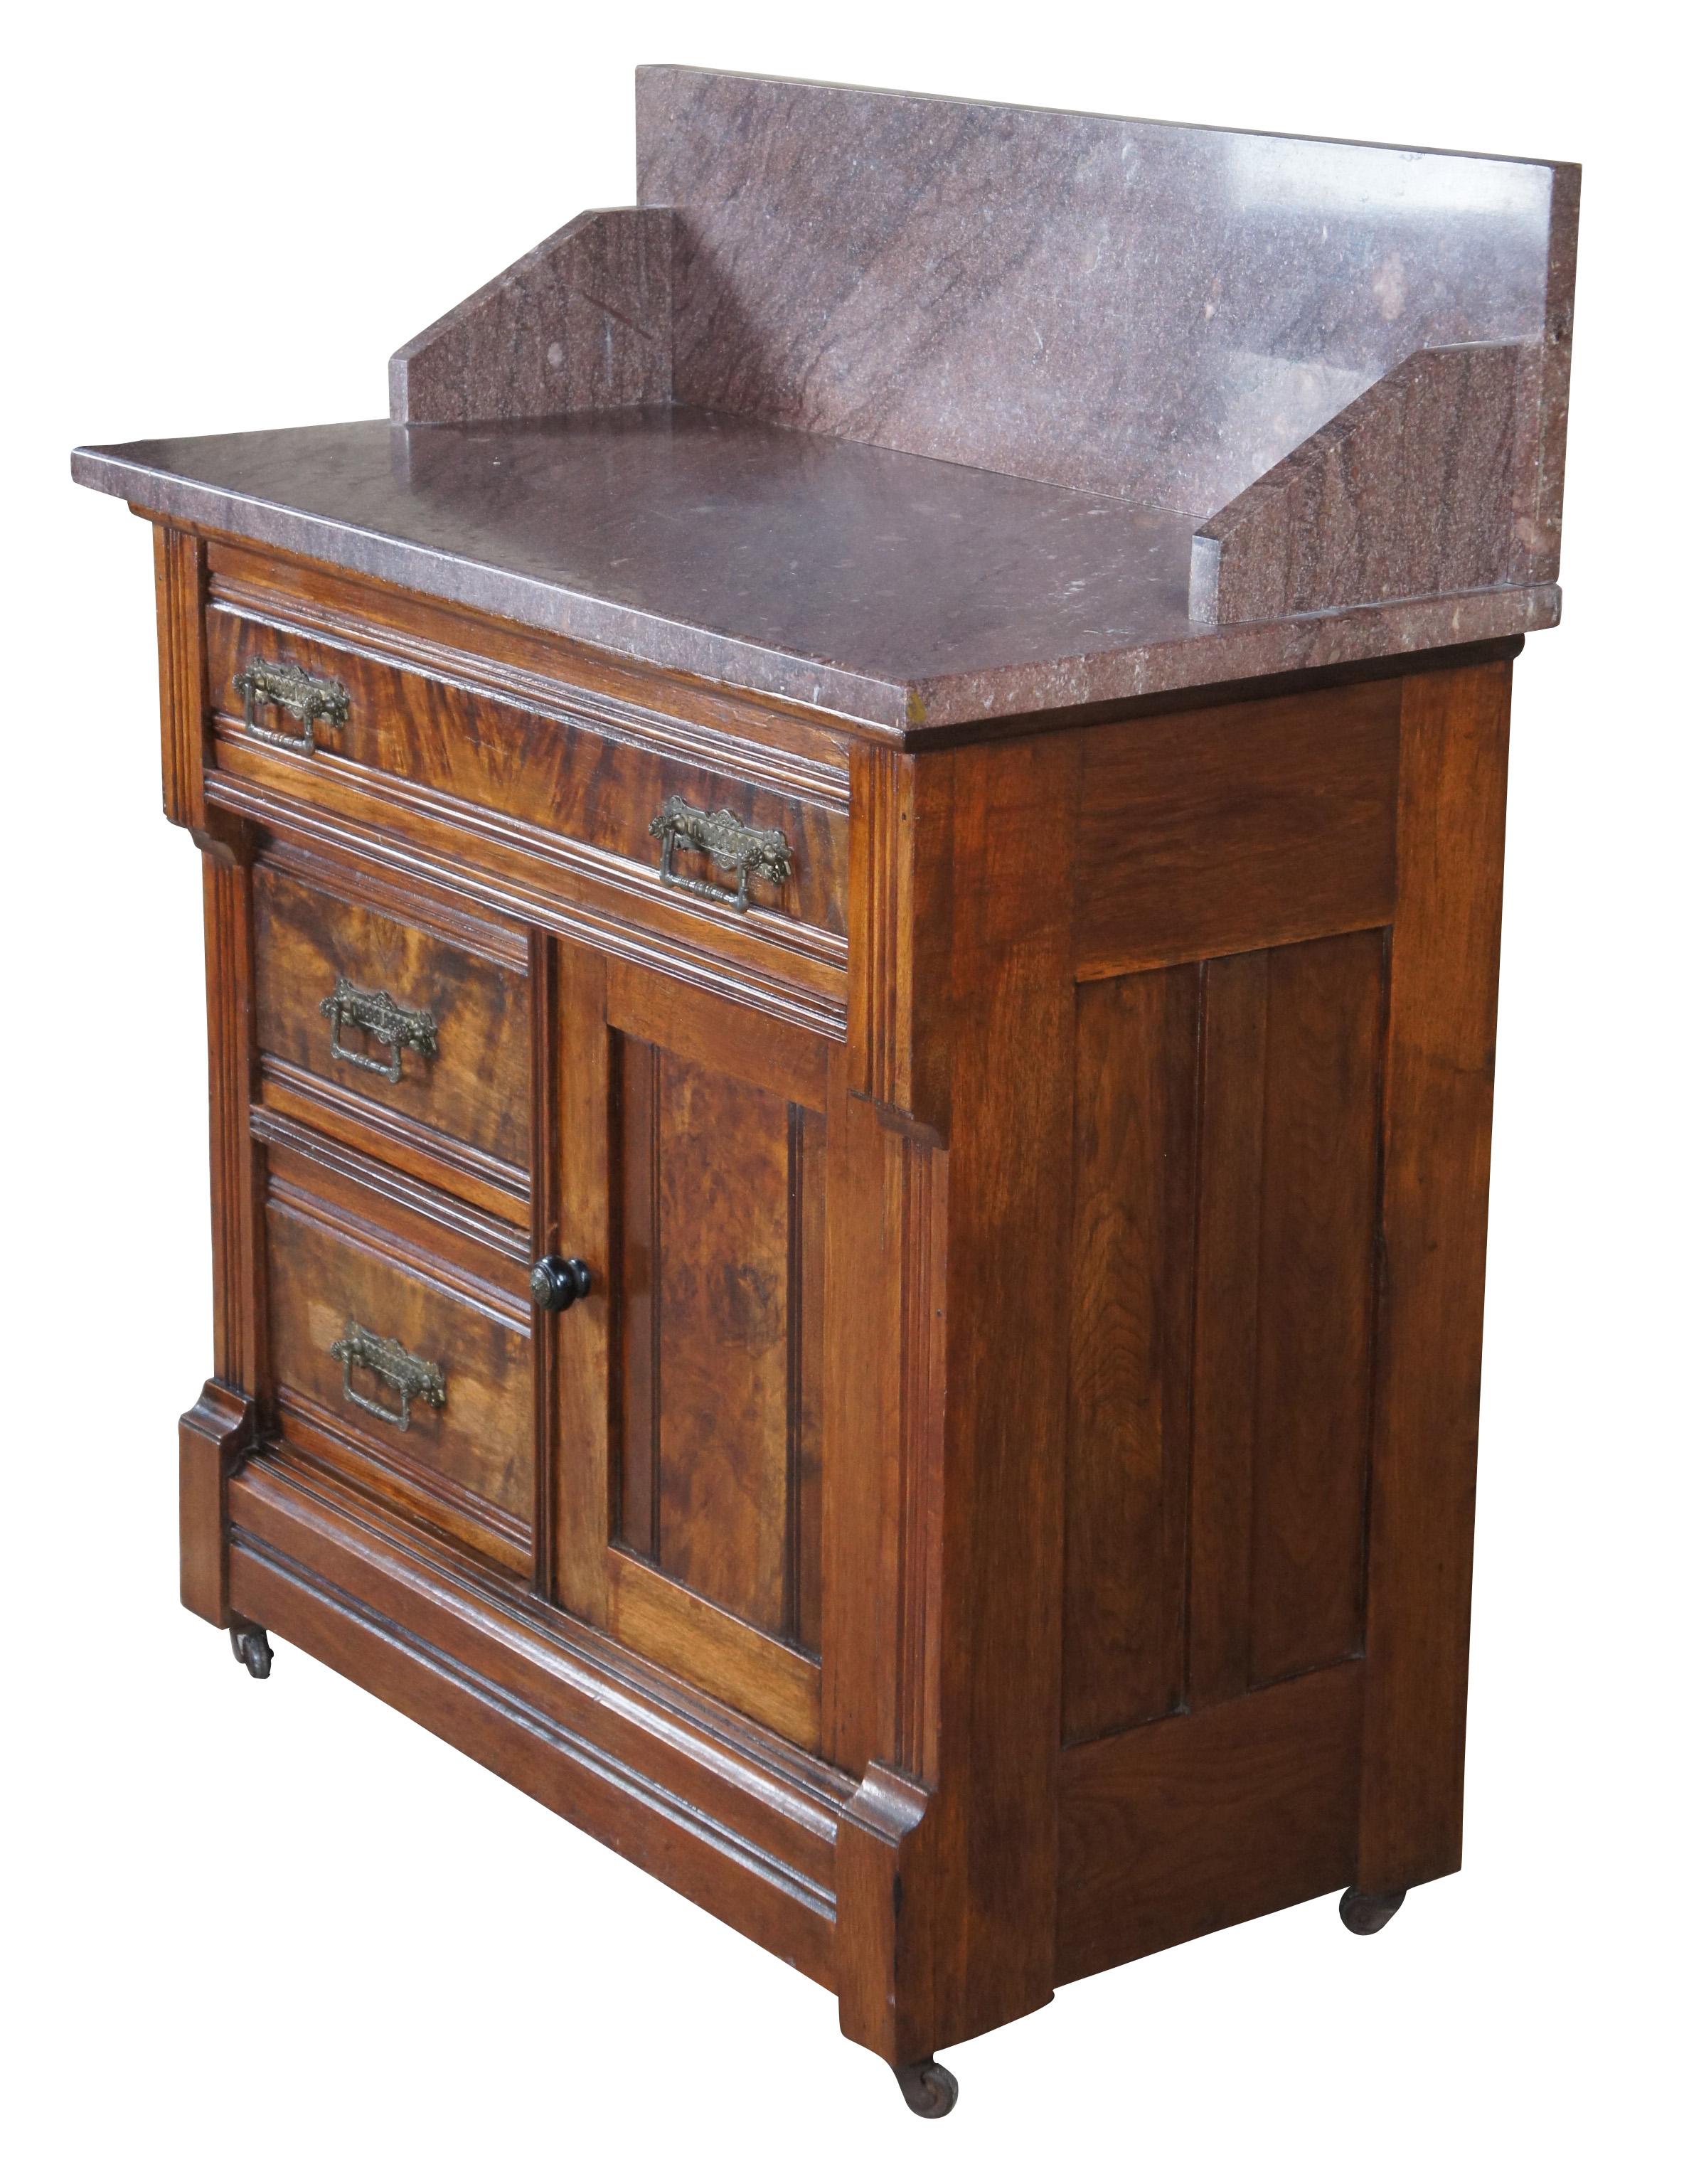 Antique Victorian wash stand / chest / side table. Made of walnut featuring Eastlake styling with marble top backsplash over three drawers and one cabinet accented with walnut burl panels and brass hardware.

Measures: 30.5